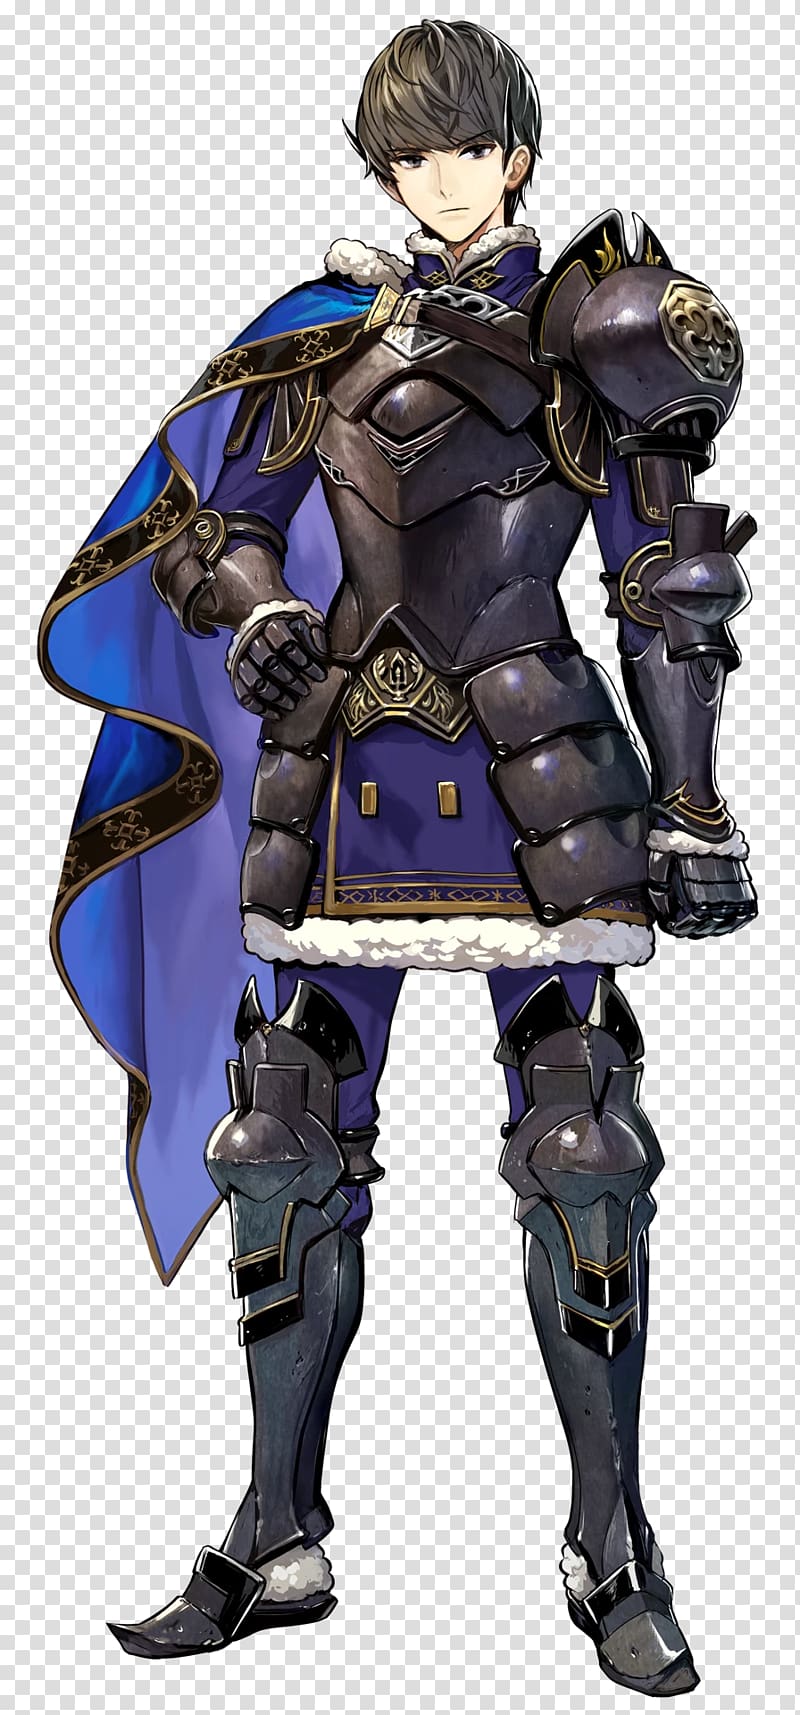 Fire Emblem Echoes: Shadows of Valentia Fire Emblem Heroes Fire Emblem Gaiden Fire Emblem Fates Video game, Minecraft transparent background PNG clipart